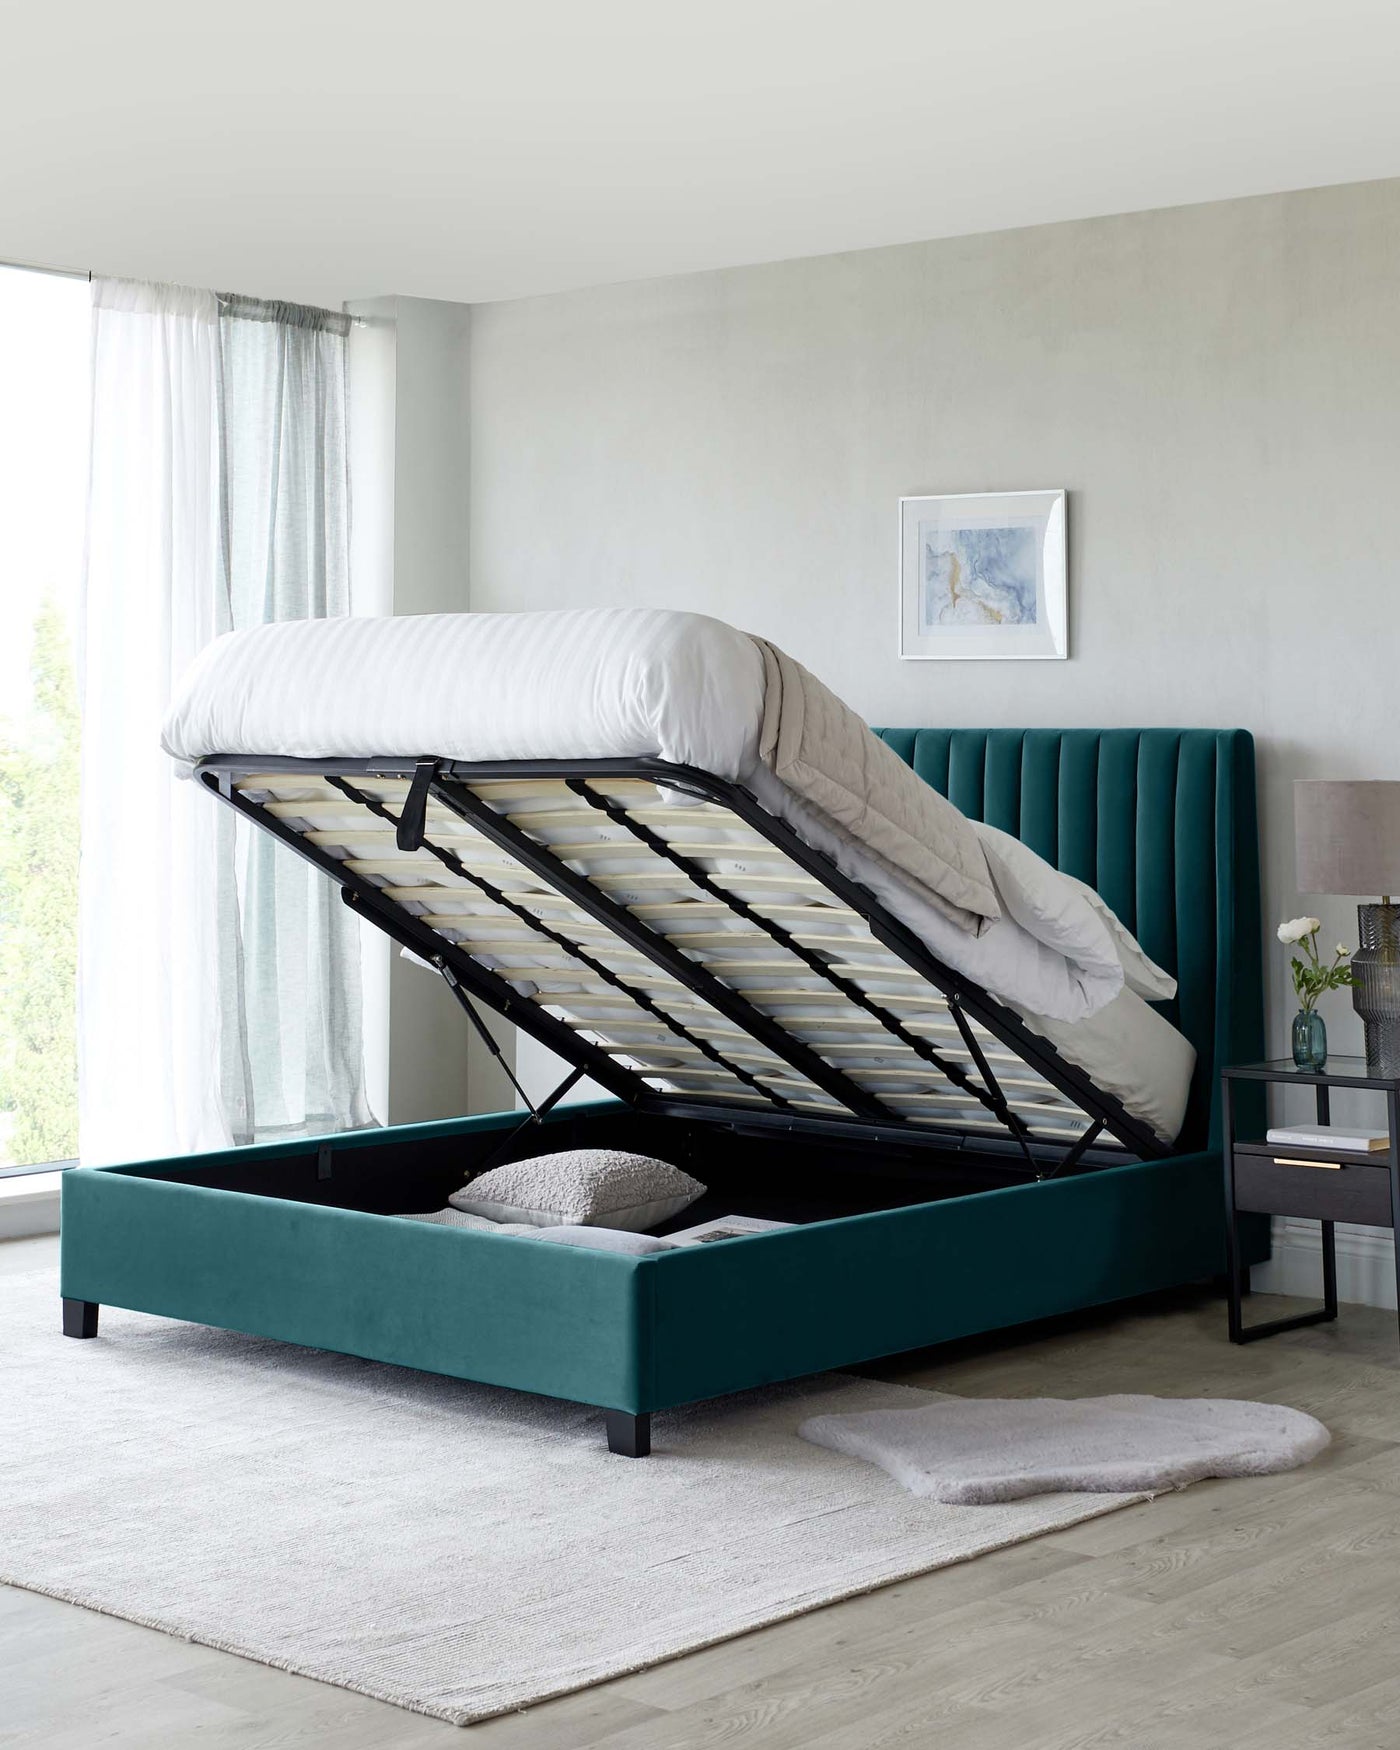 Elegant teal upholstered storage bed with a vertically channelled headboard and an open frame revealing a spacious under-mattress storage area. The bed is complemented by a black and wood accent nightstand with a lamp and floral arrangement, juxtaposed against a subdued room decor with grey walls and light wood flooring.